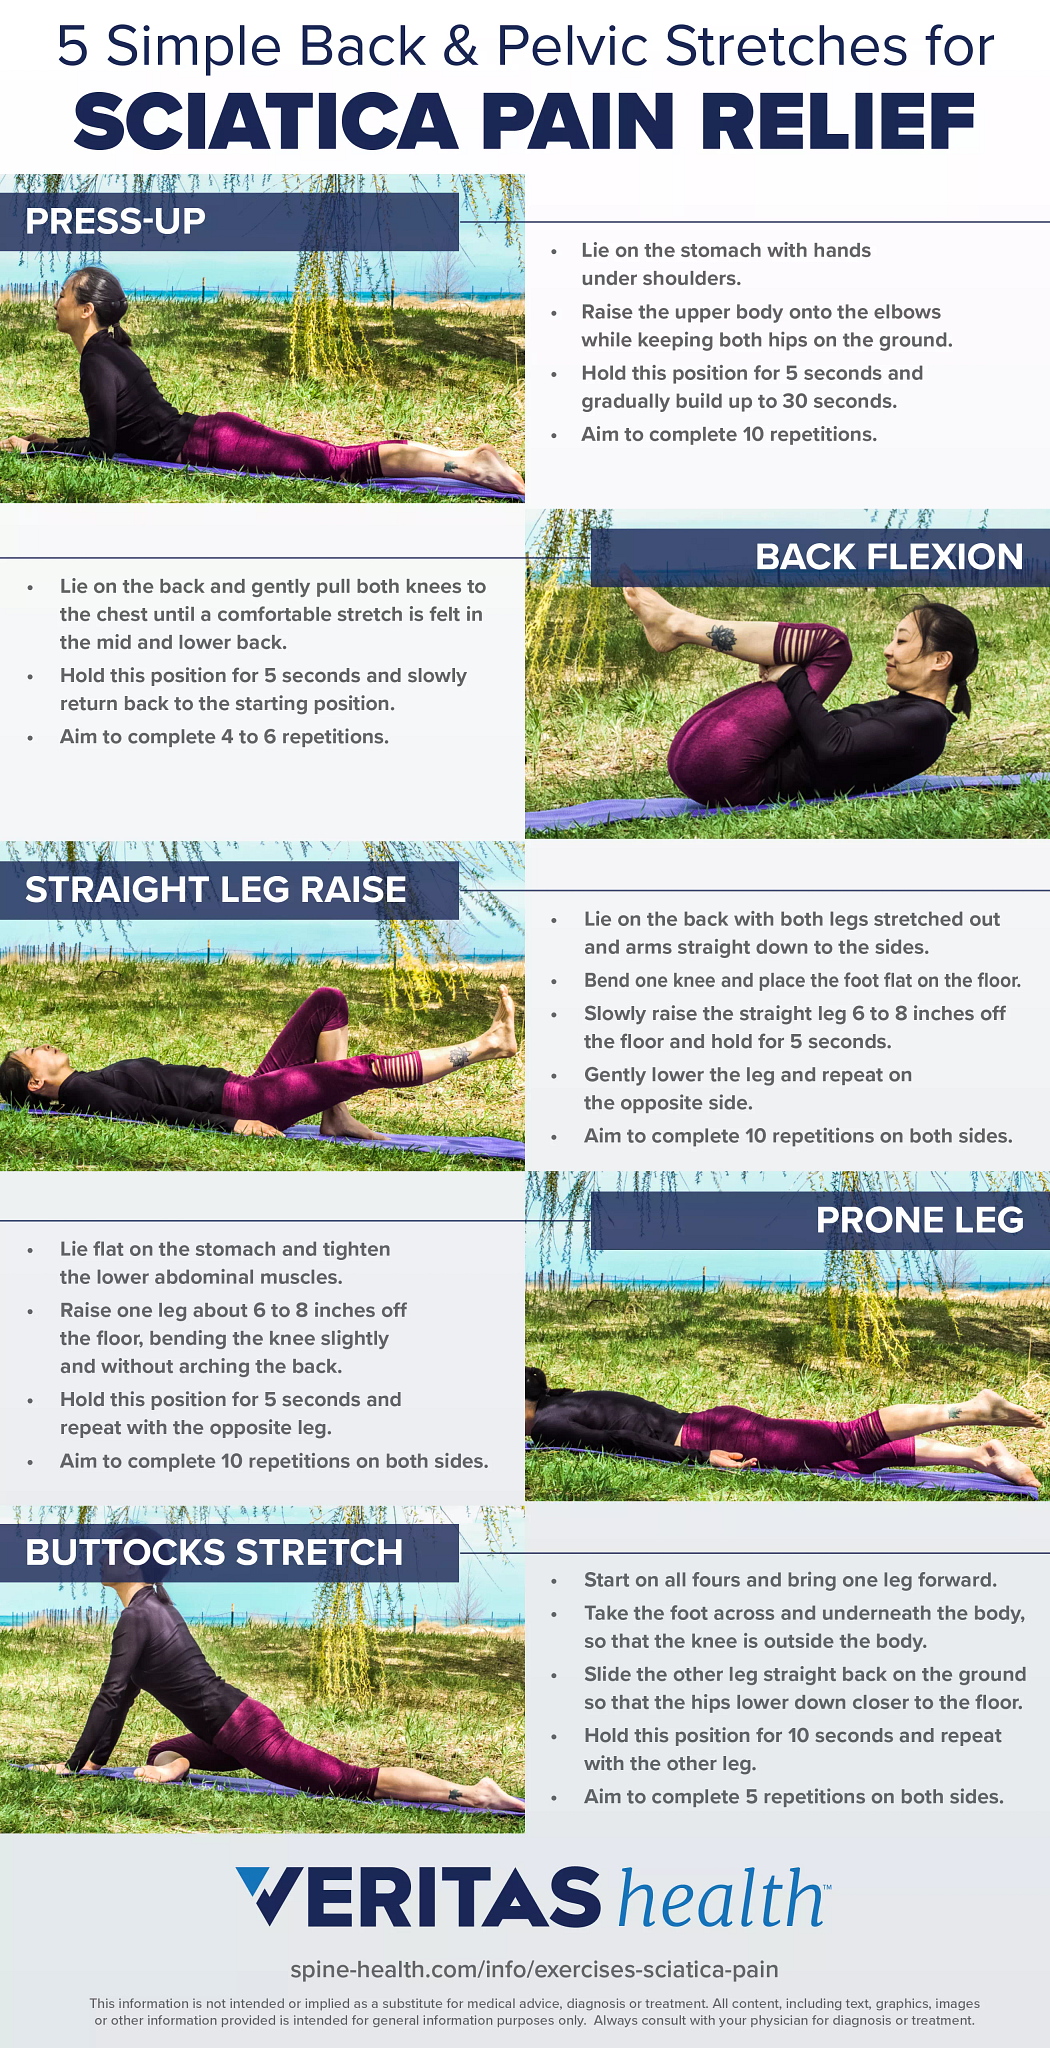 How to Exercise with Sciatica: Tips From Physical Therapists